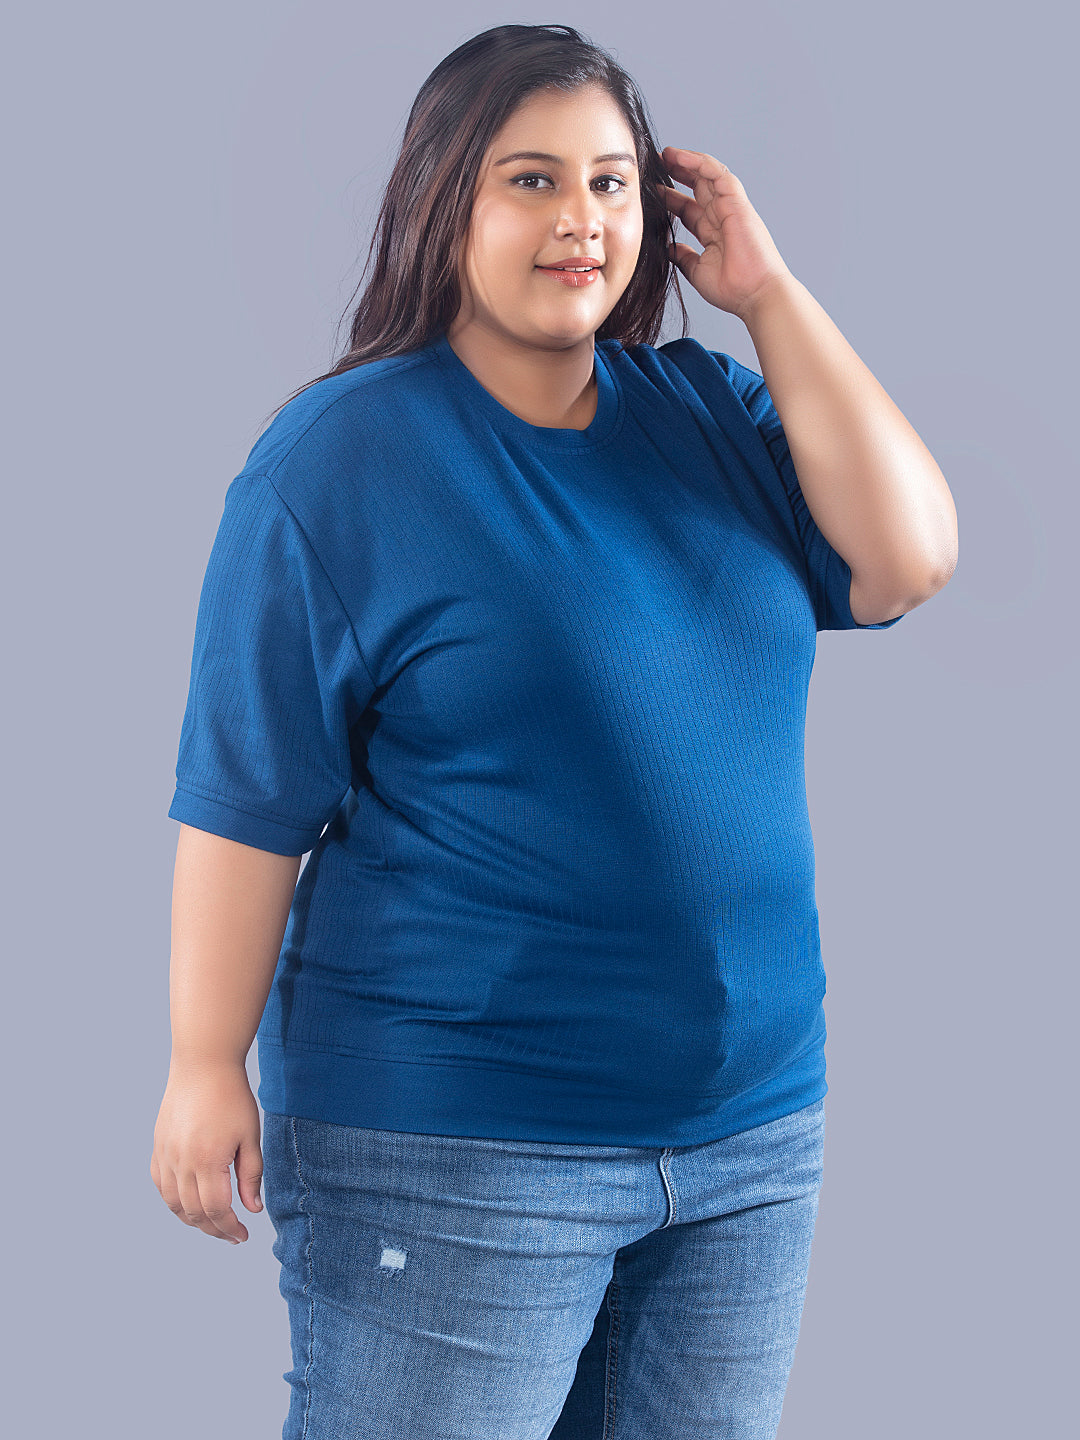 Plus Size Cotton Street Style T-shirts For Summer -Prime Blue